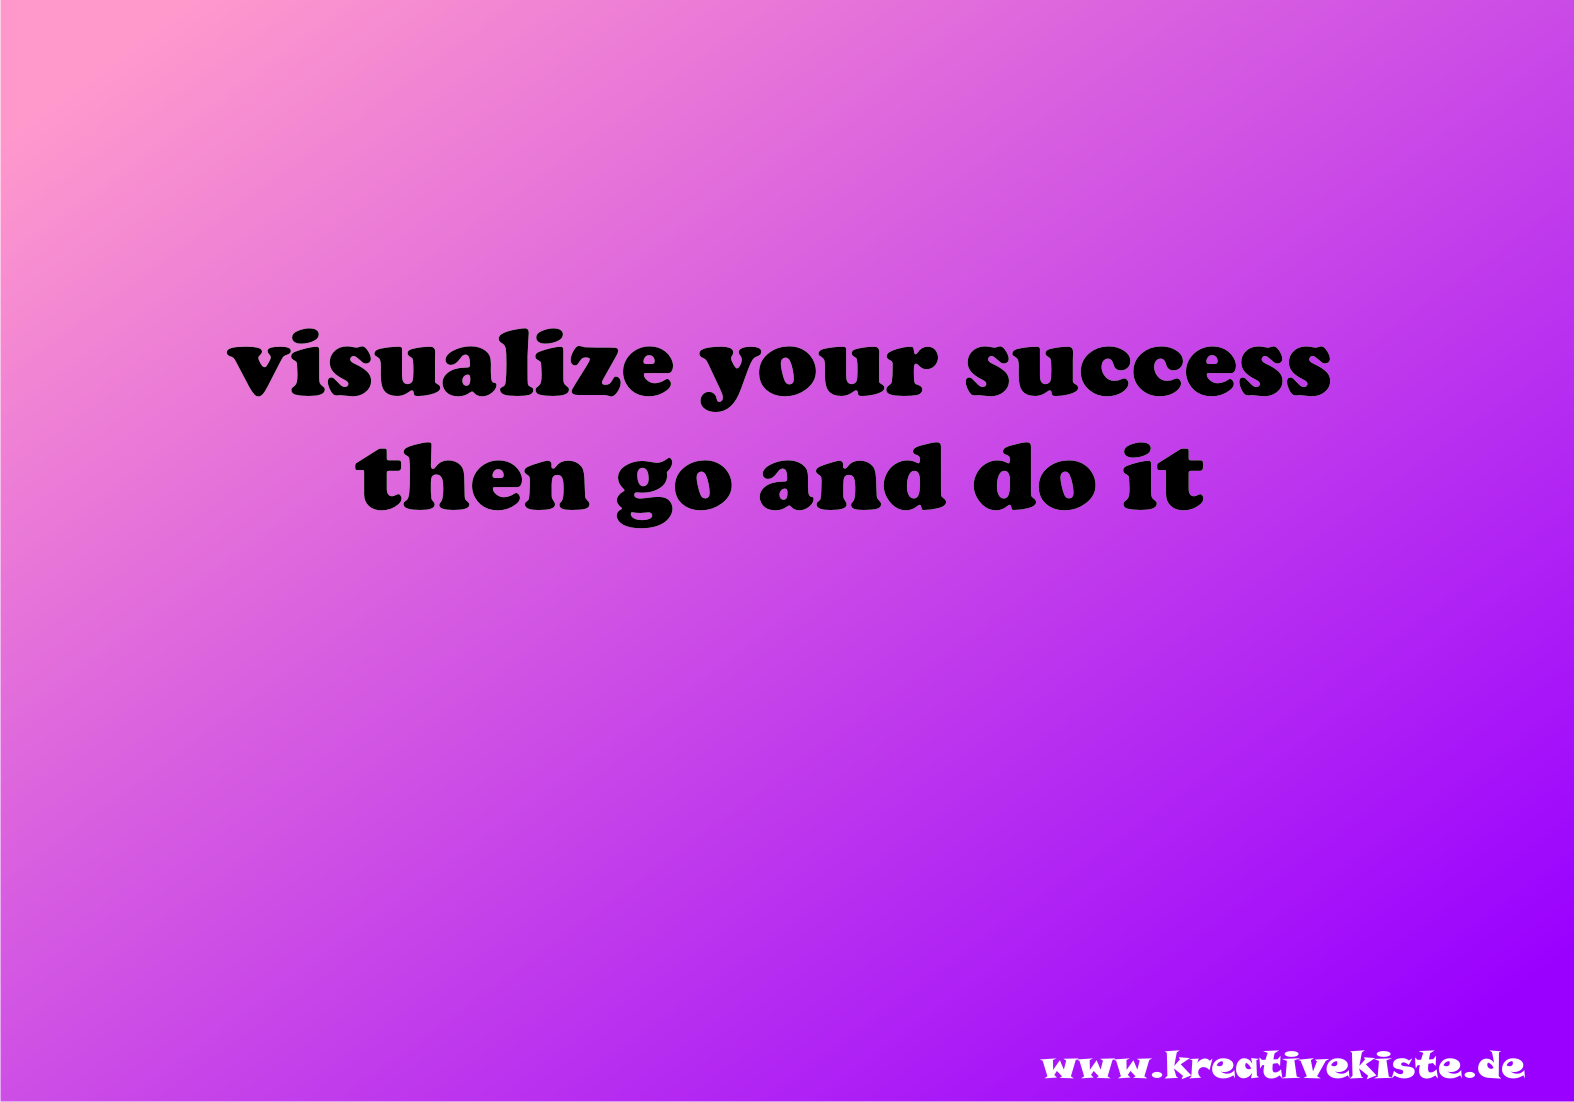 visualize your success then go and do it